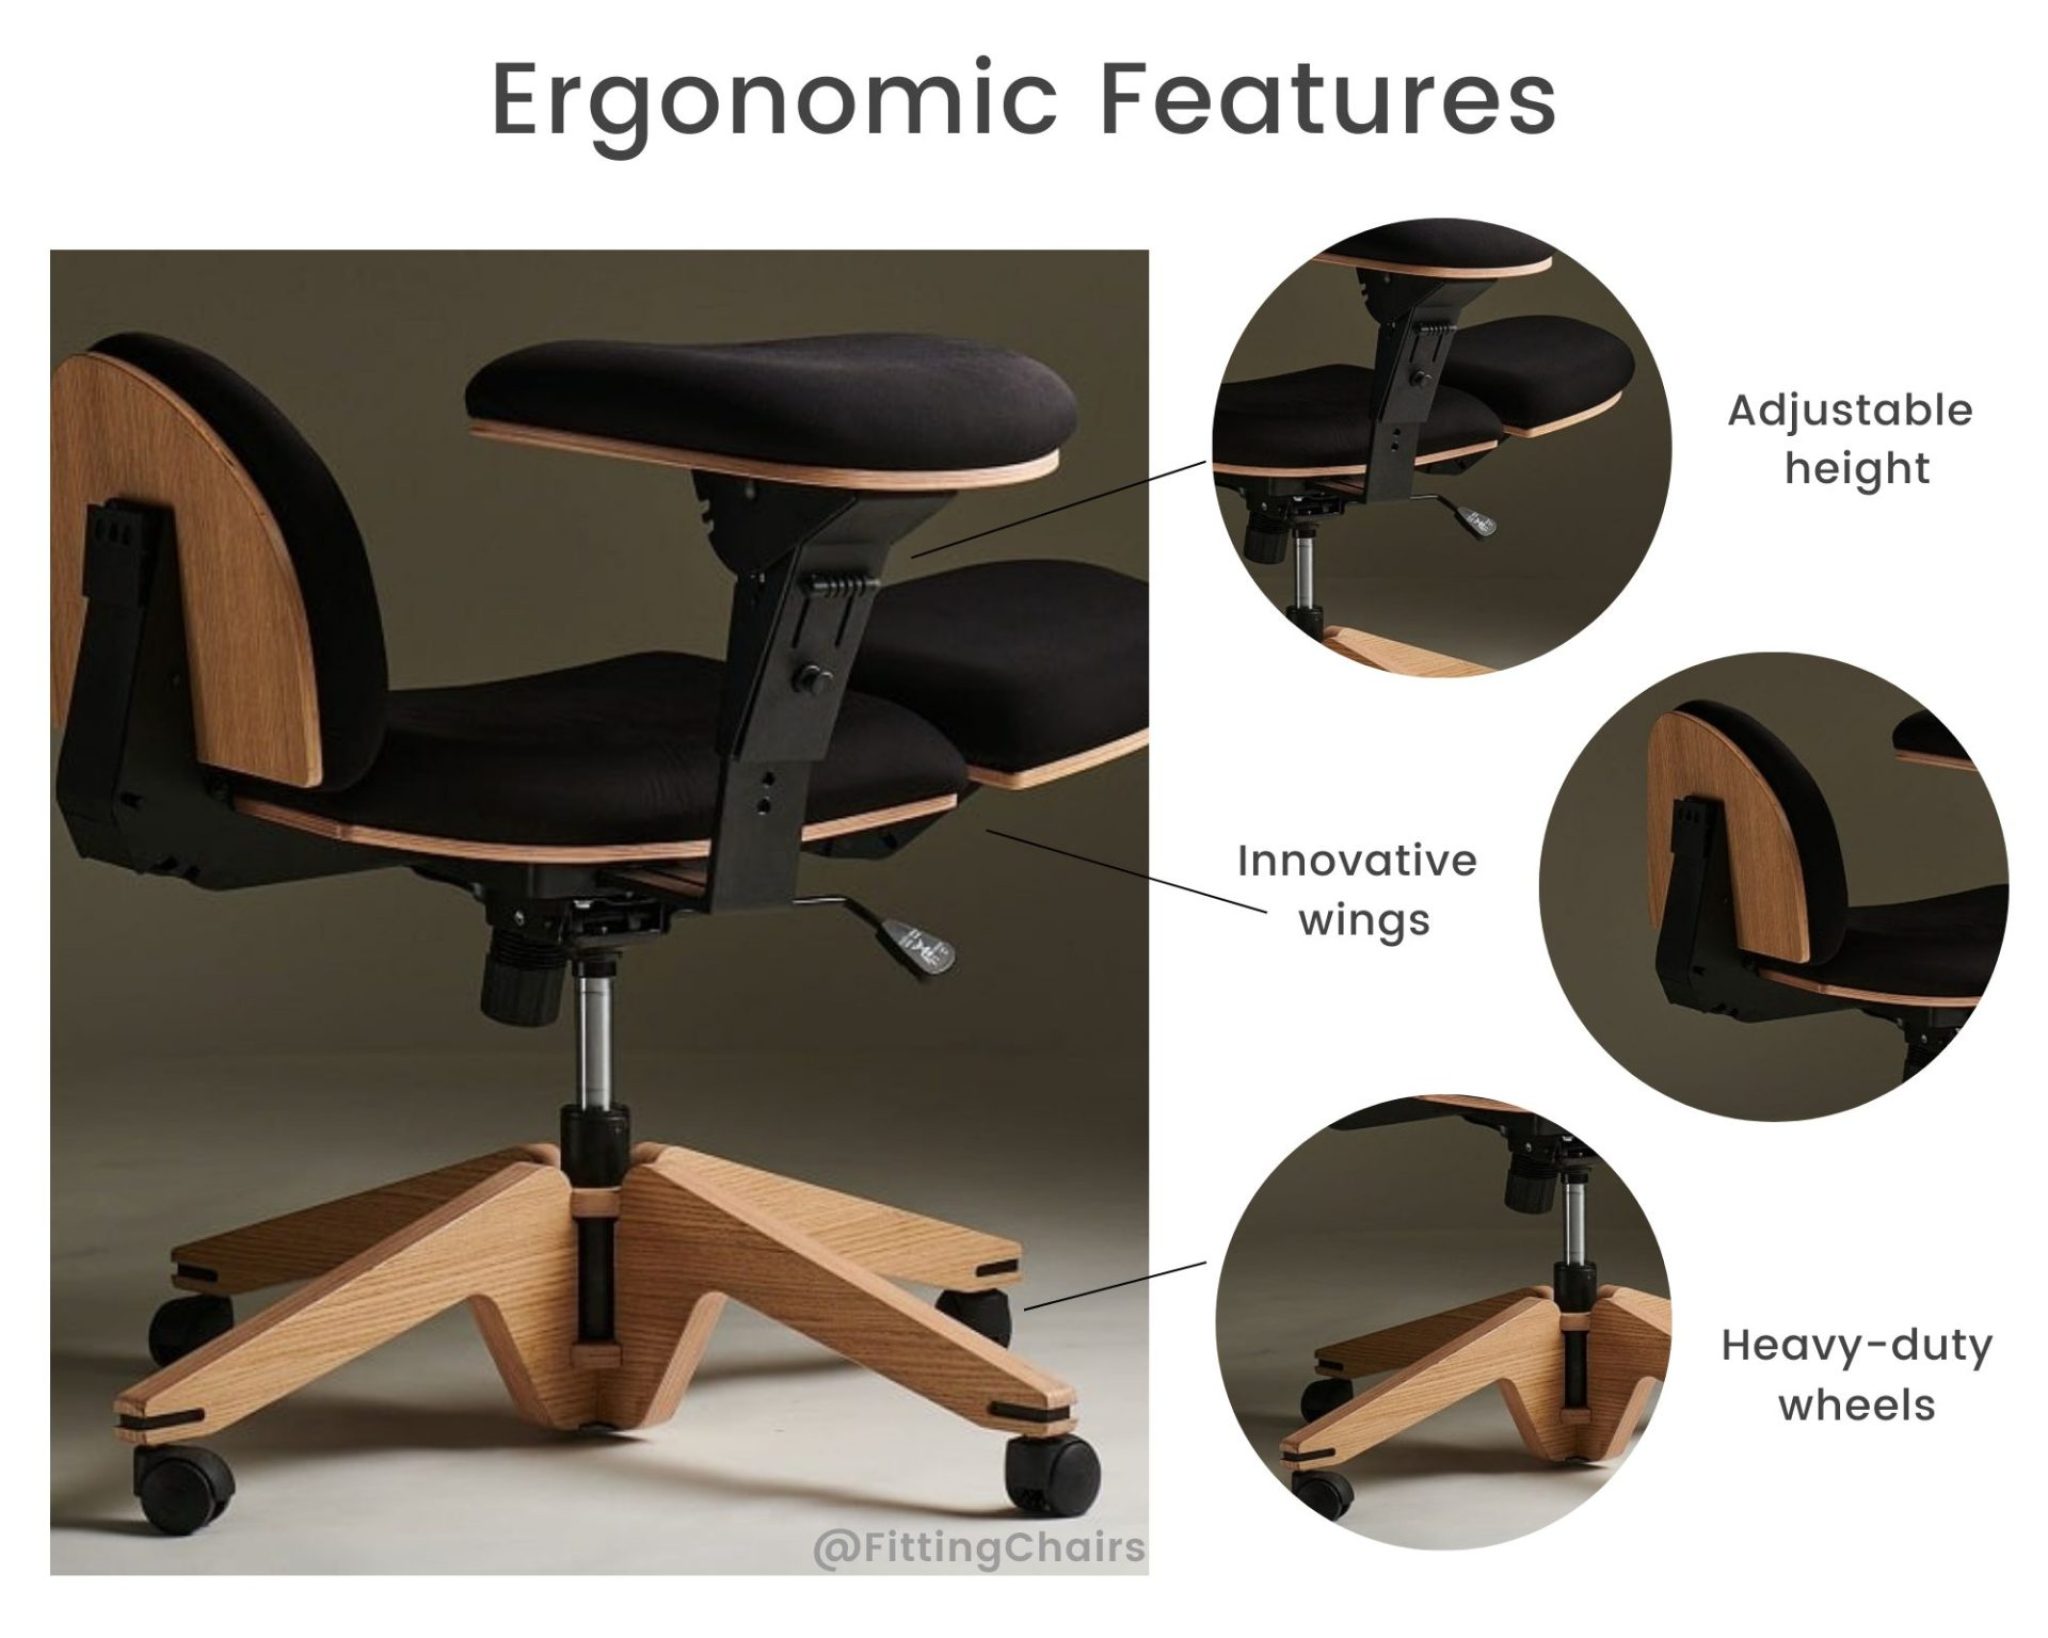 BeYou Chair Review 2022: The Innovative Transformation